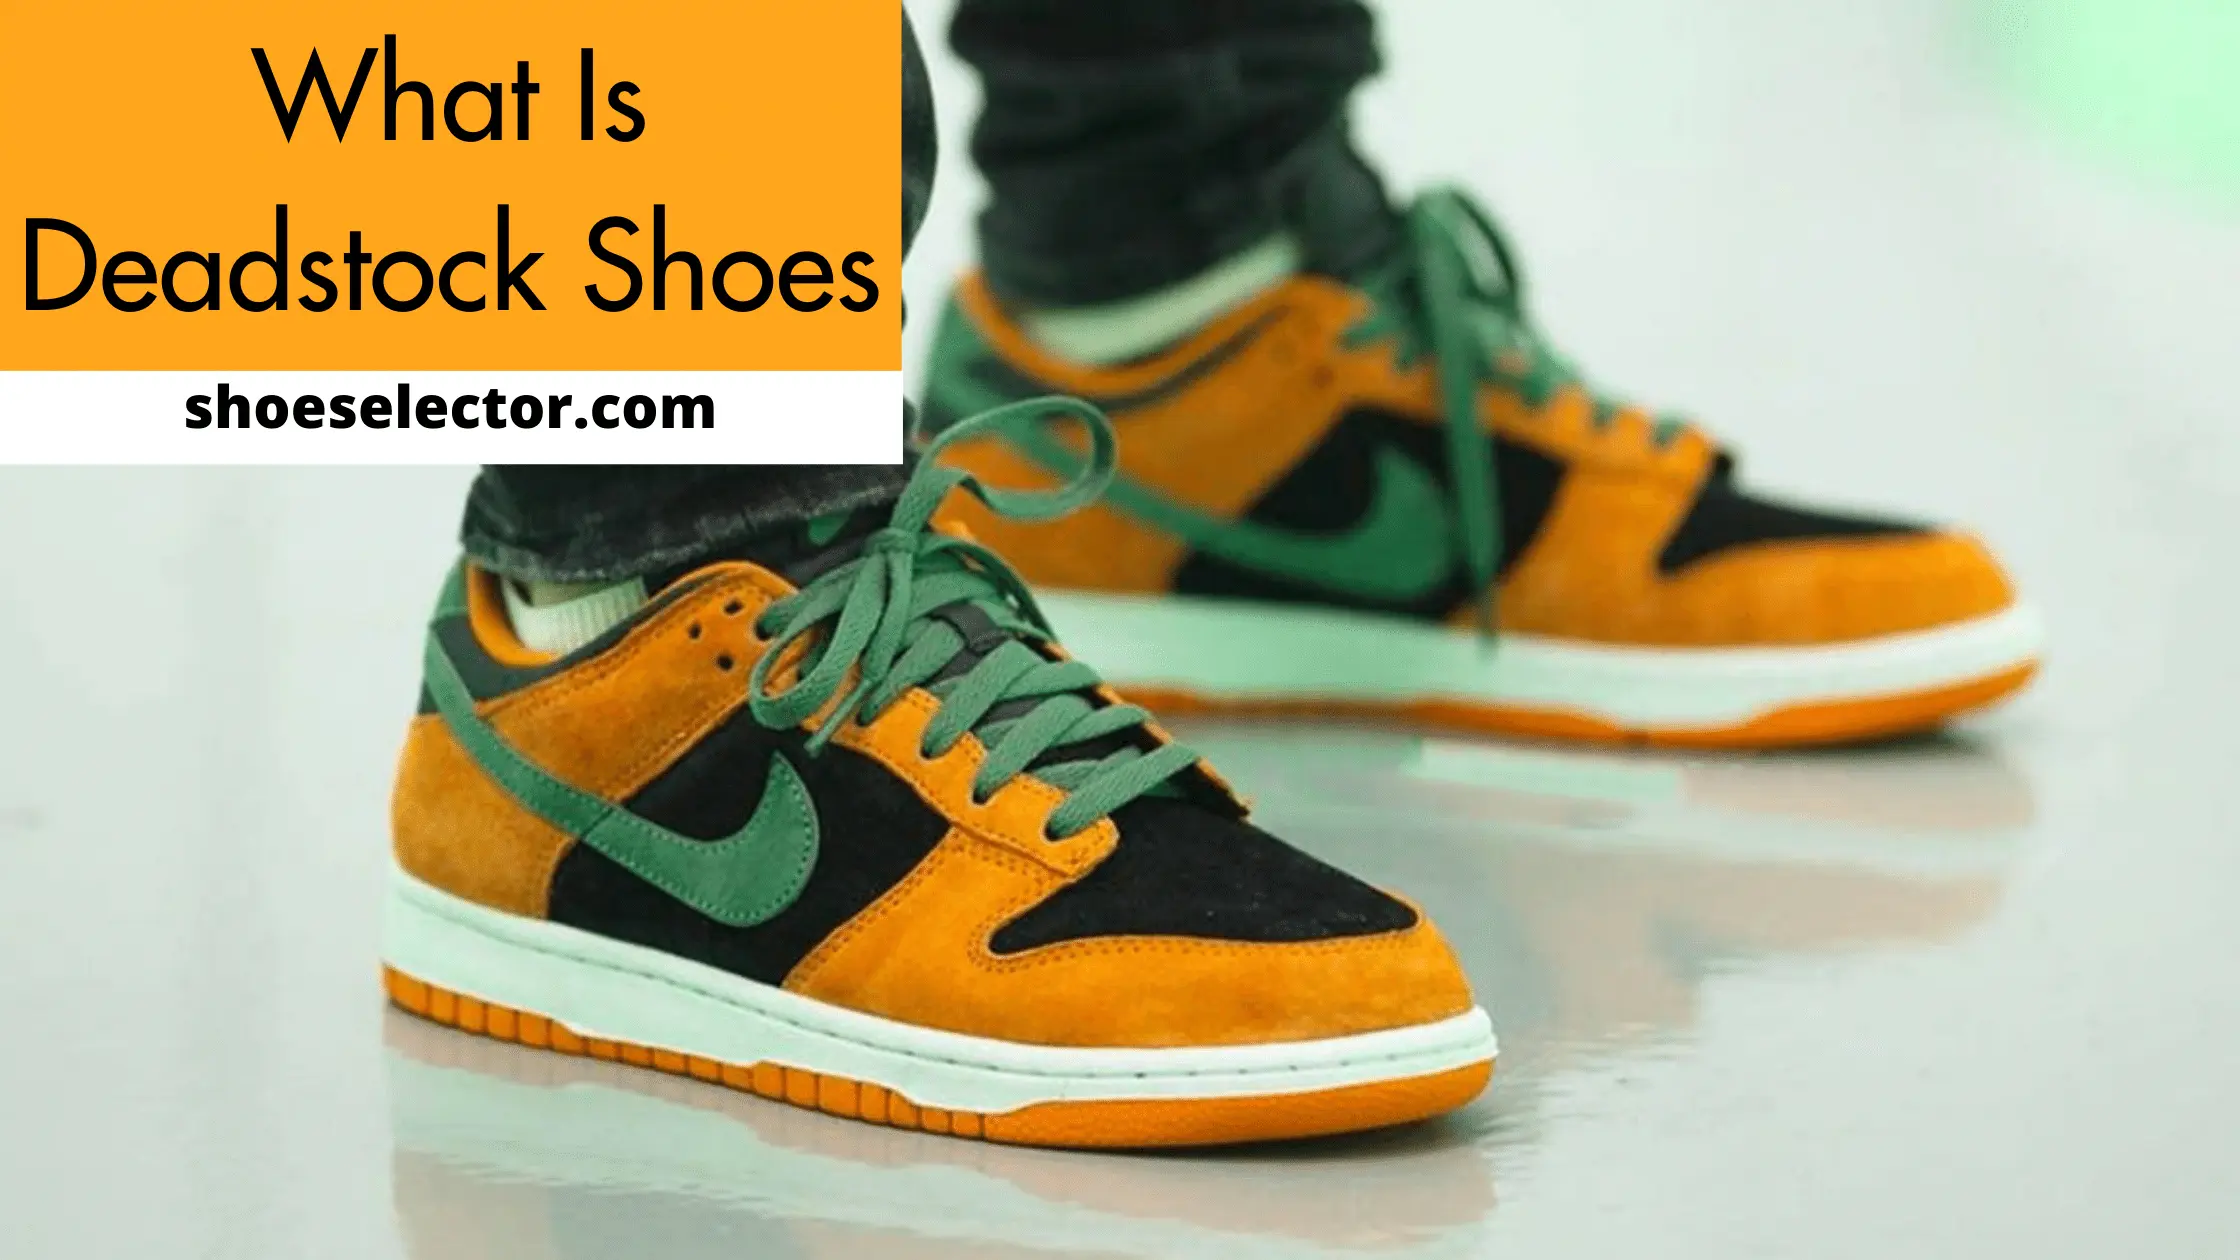 What Is Deadstock Shoes? Simple & Complete Guide